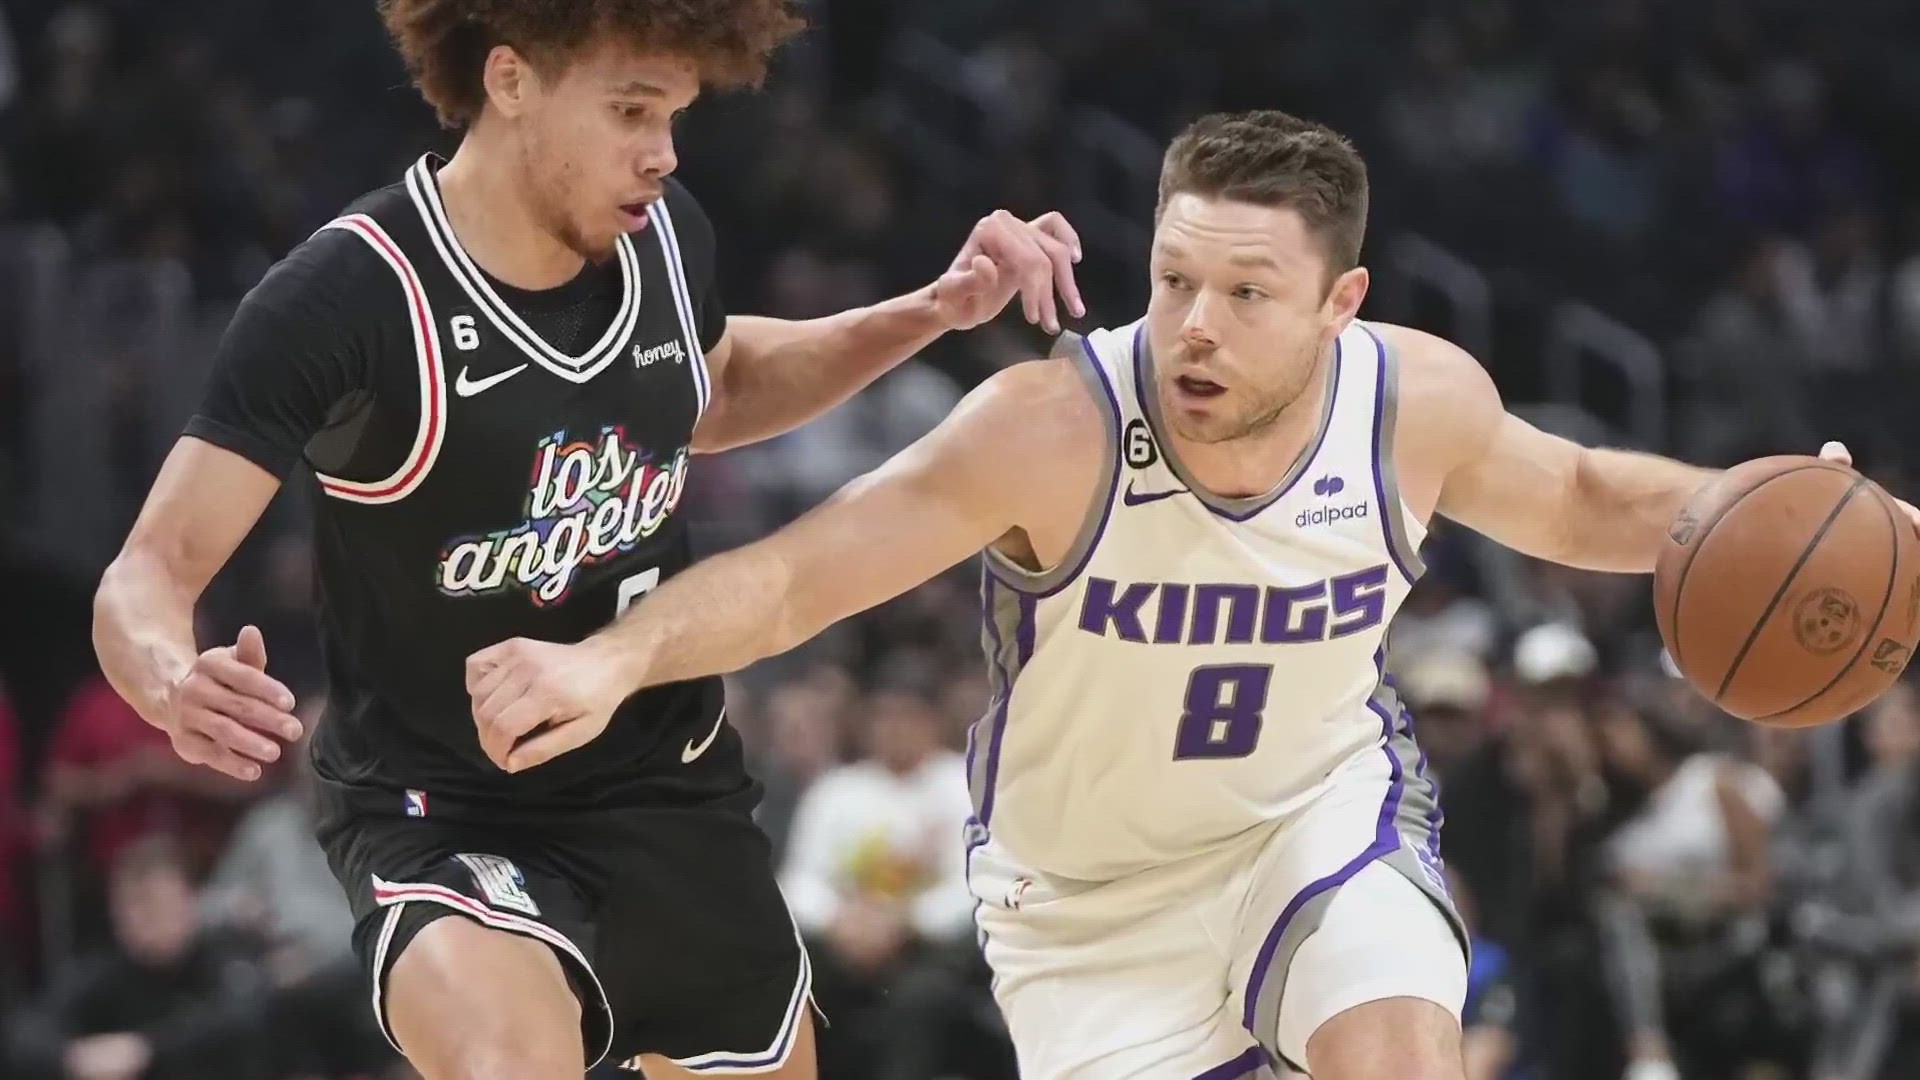 Sacramento Kings guard Matthew Dellavedova is leaving the franchise after signing a two-year contract with Melbourne United.